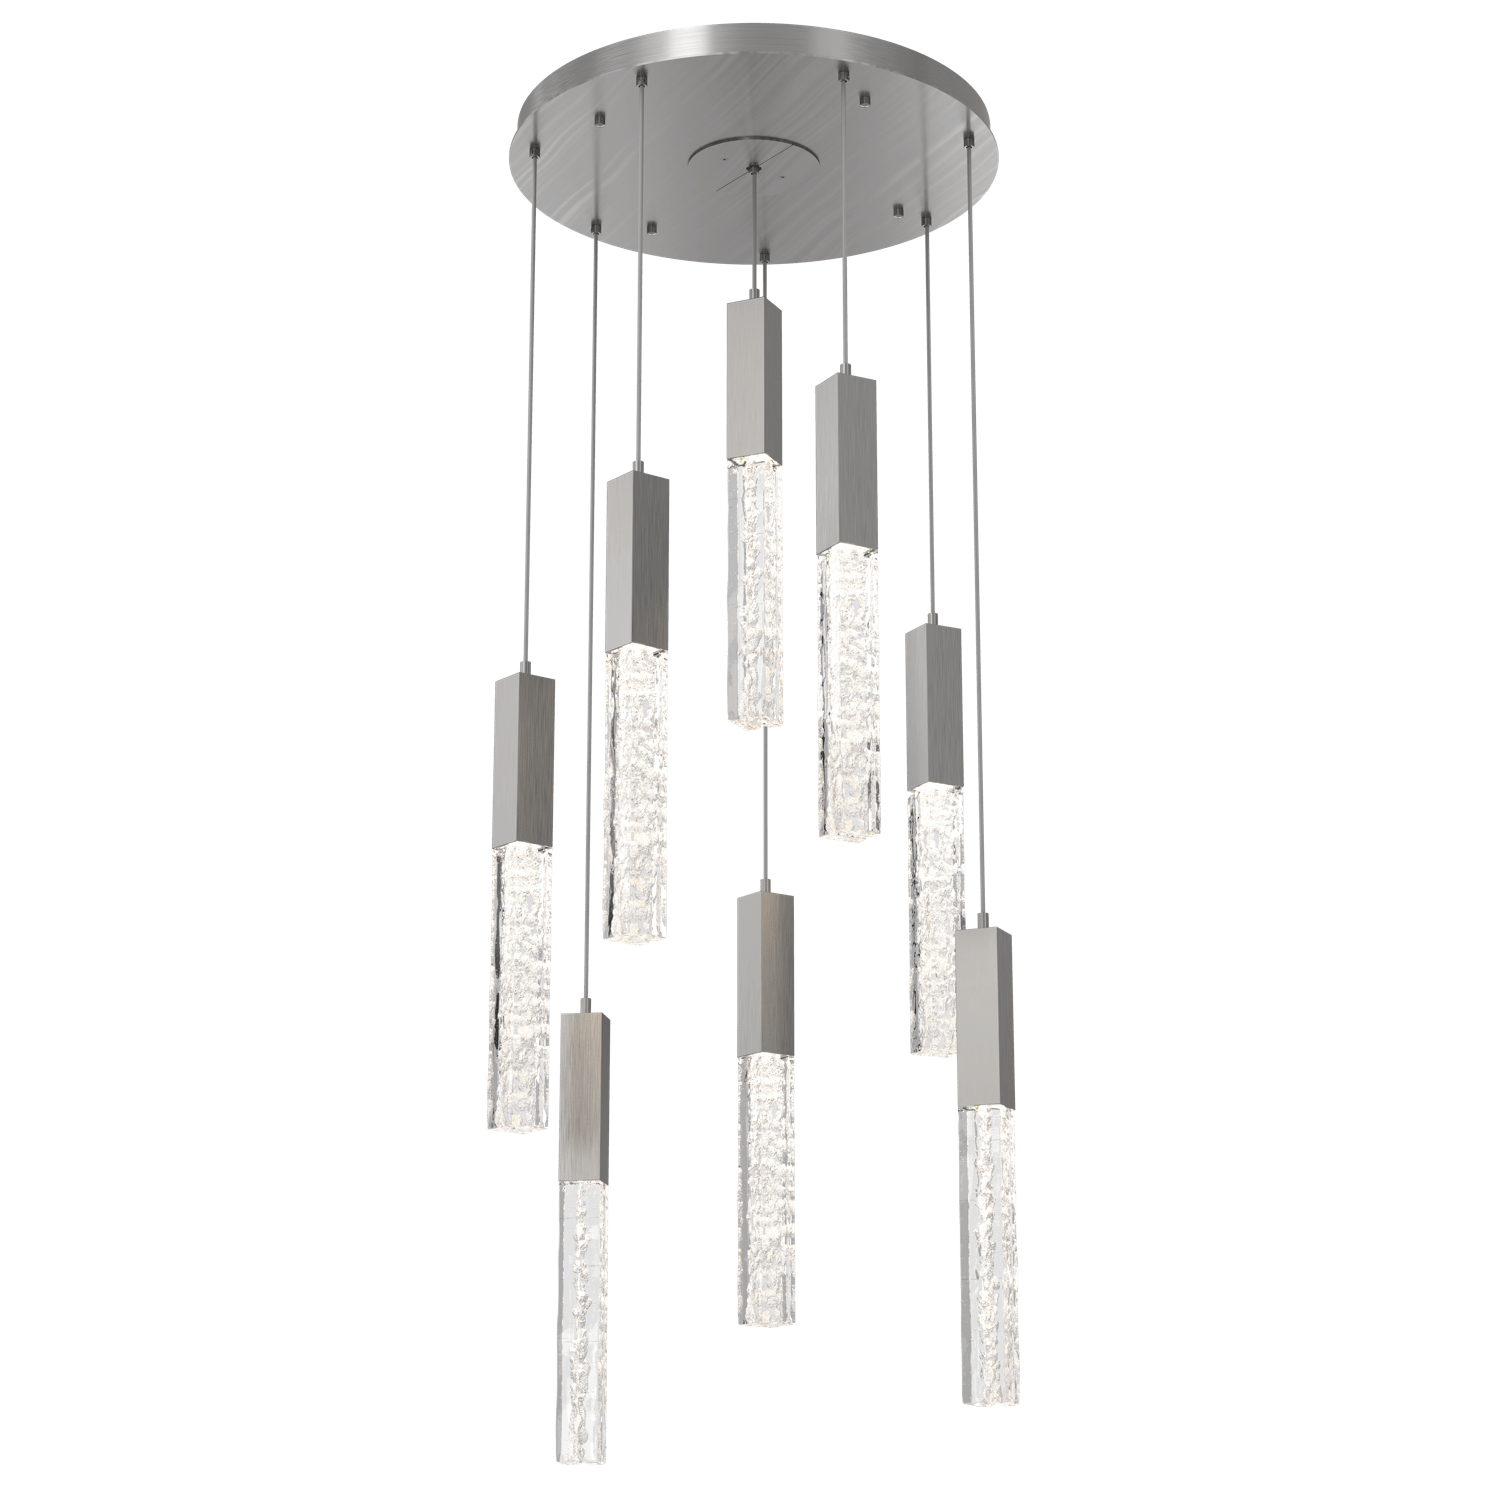 CHB0060-08-SN-GC-Hammerton-Studio-Axis-8-Light-Pendant-Chandelier-with-Satin-Nickel-finish-and-clear-cast-glass-and-LED-lamping